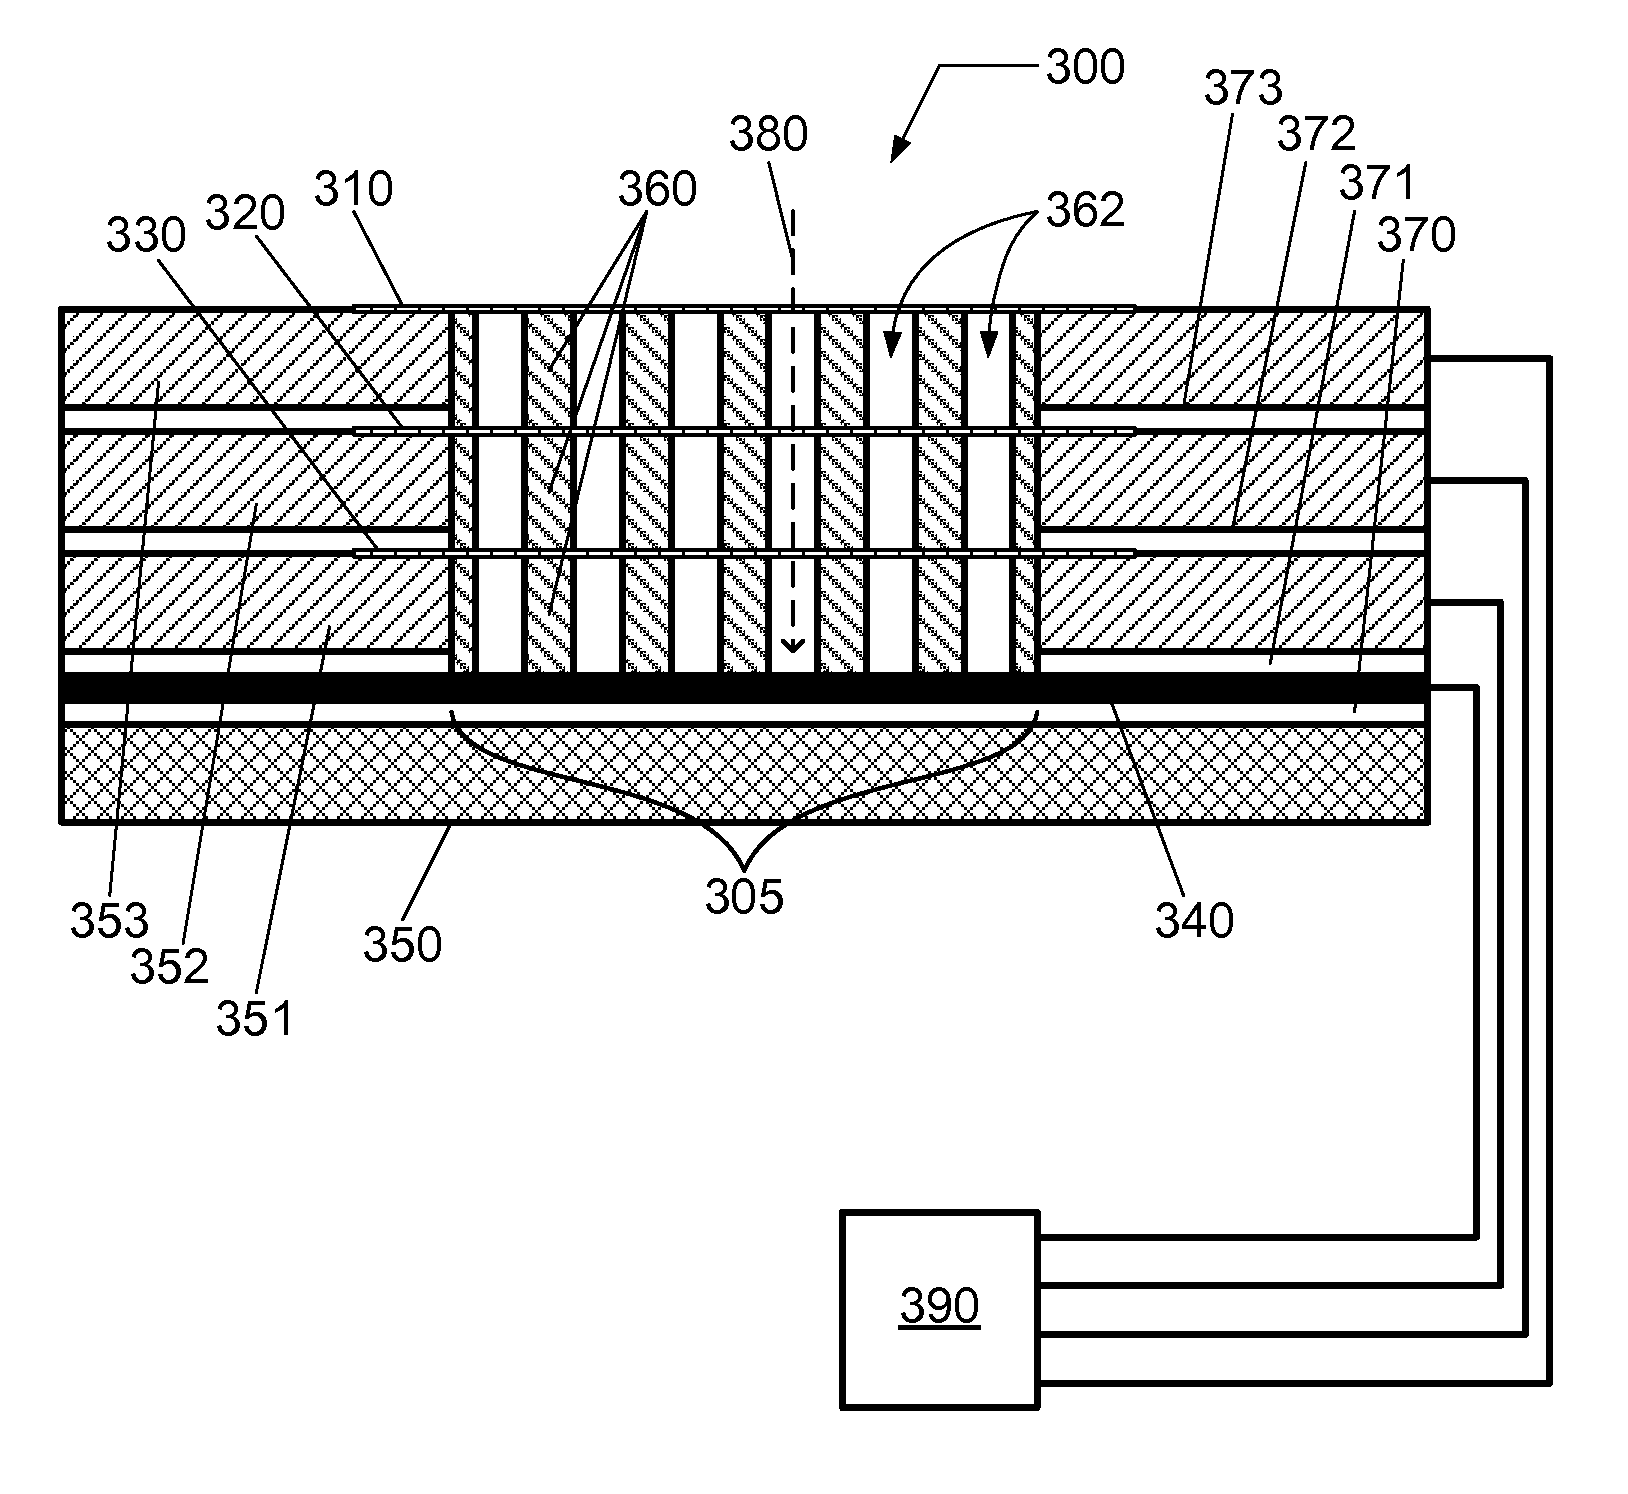 Ion energy analyzer and methods of manufacturing and operating